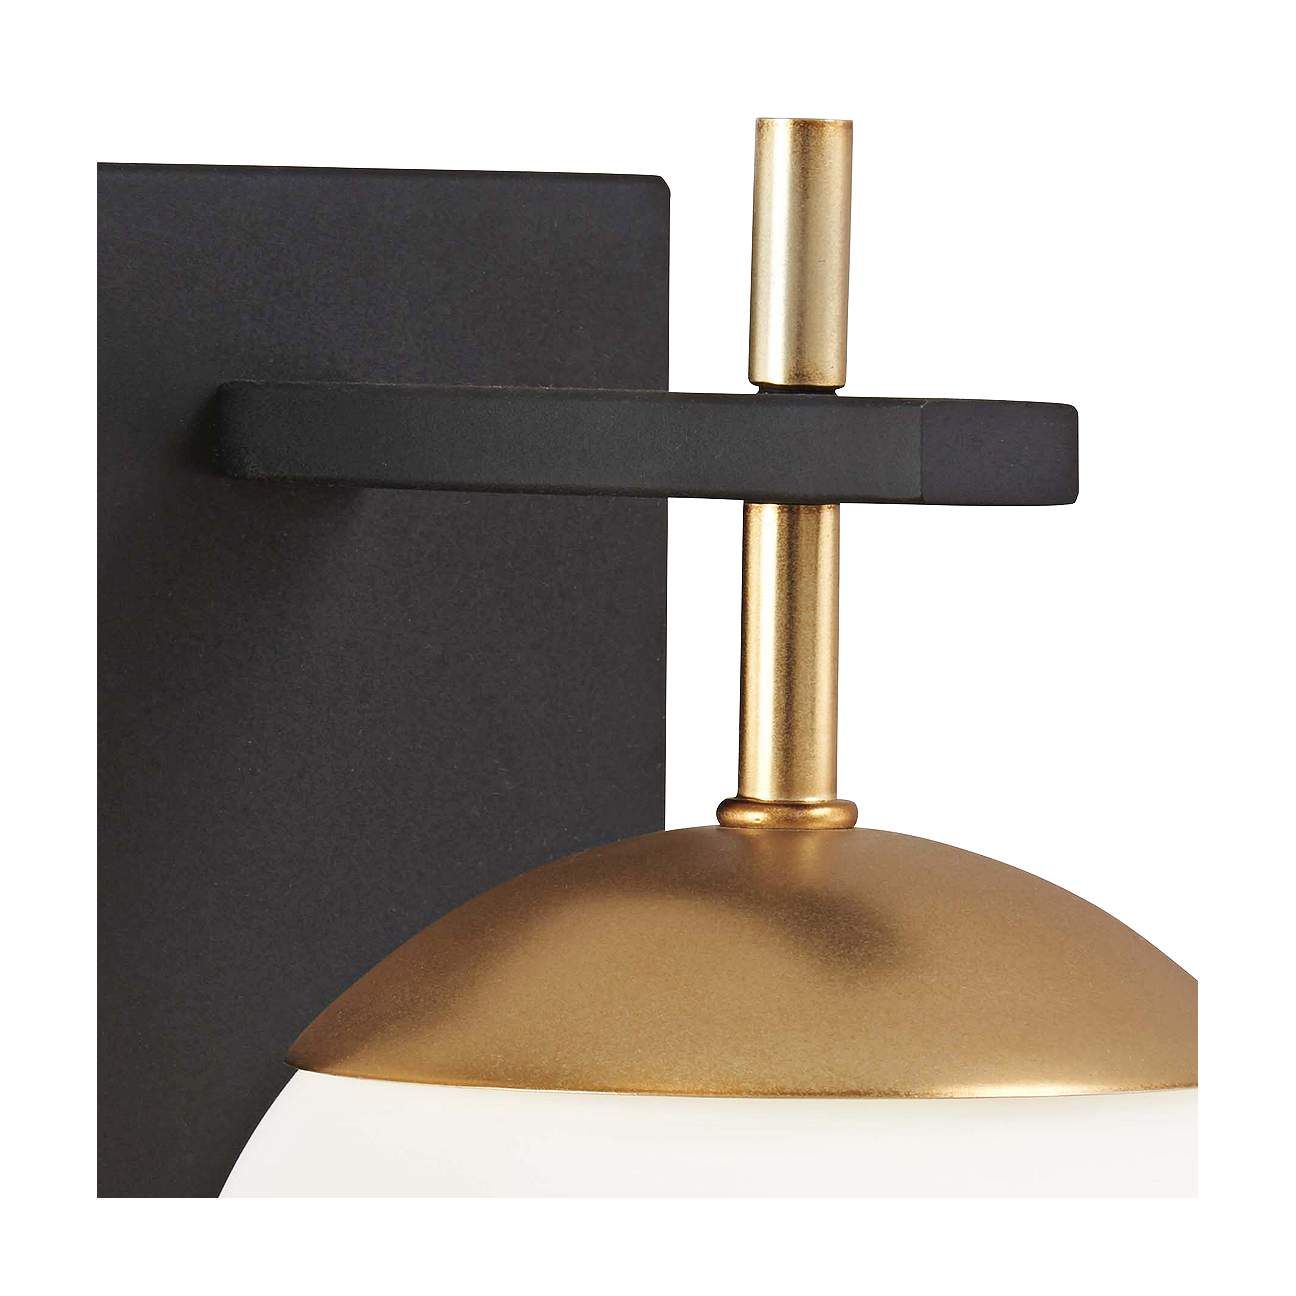 George Kovacs Alluria 9 3/4" High Black and Gold Wall Sconce | LampsPlus.com